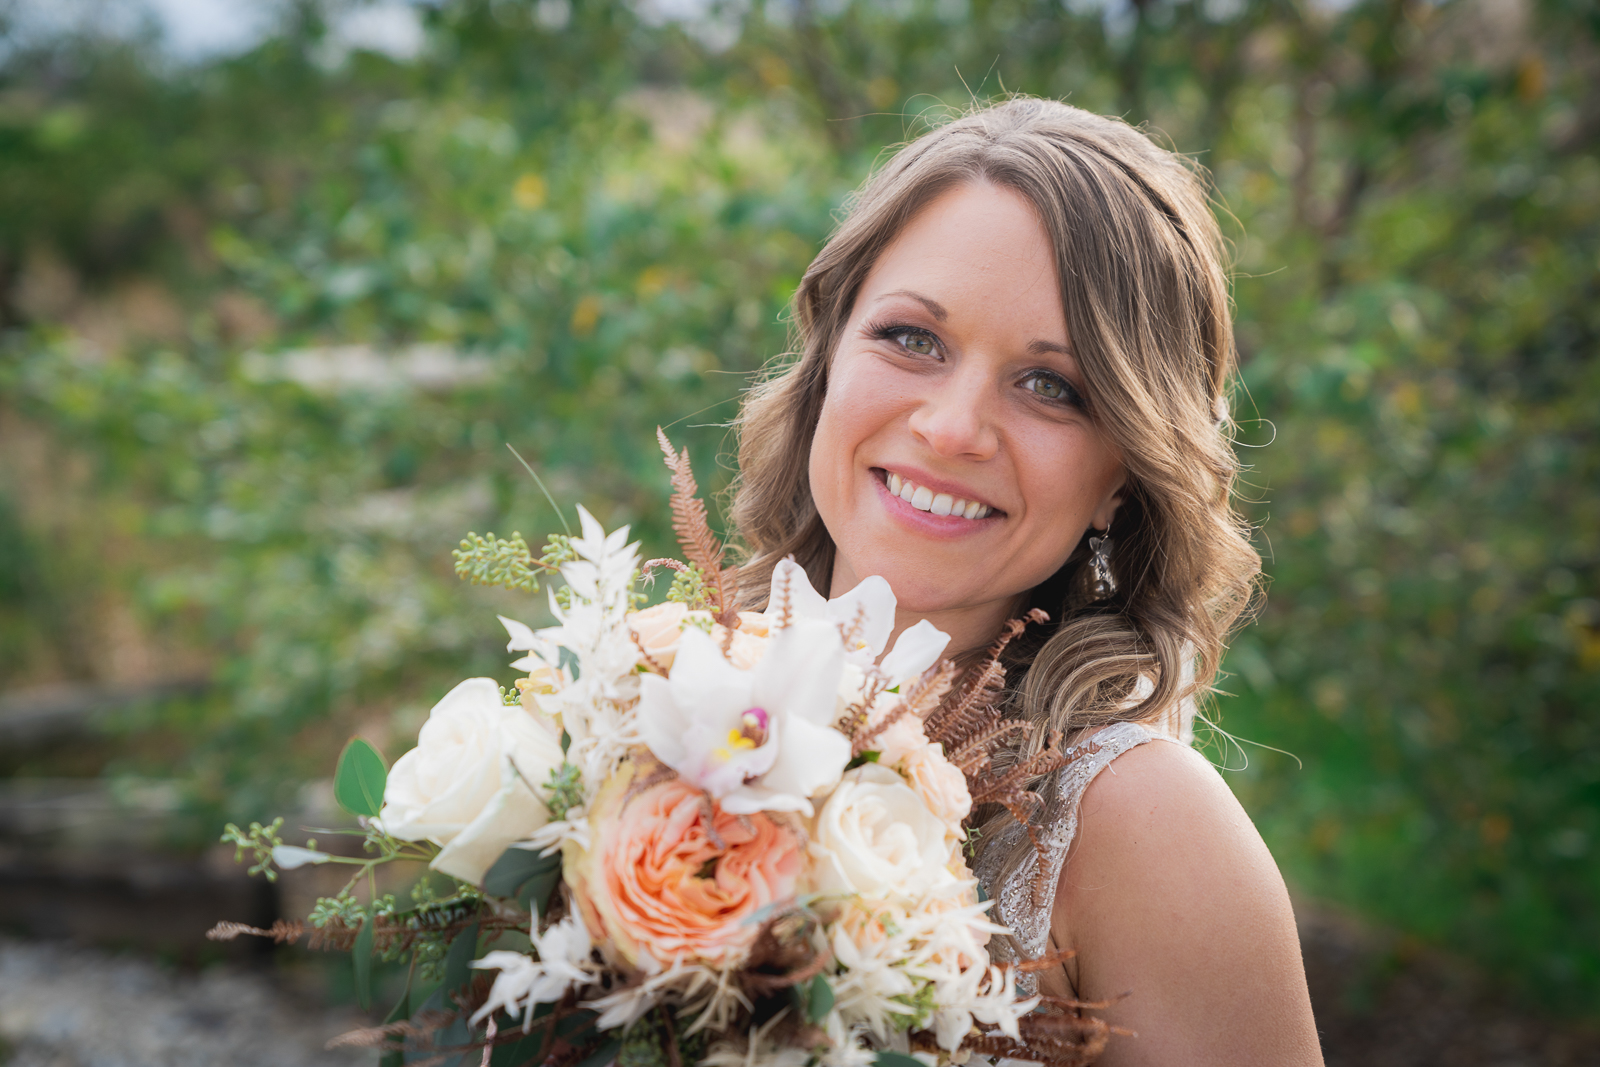 Bride, bridal portrait, flowers, smile, nature, fall wedding, rustic outdoor wedding ceremony at White Birch Barn